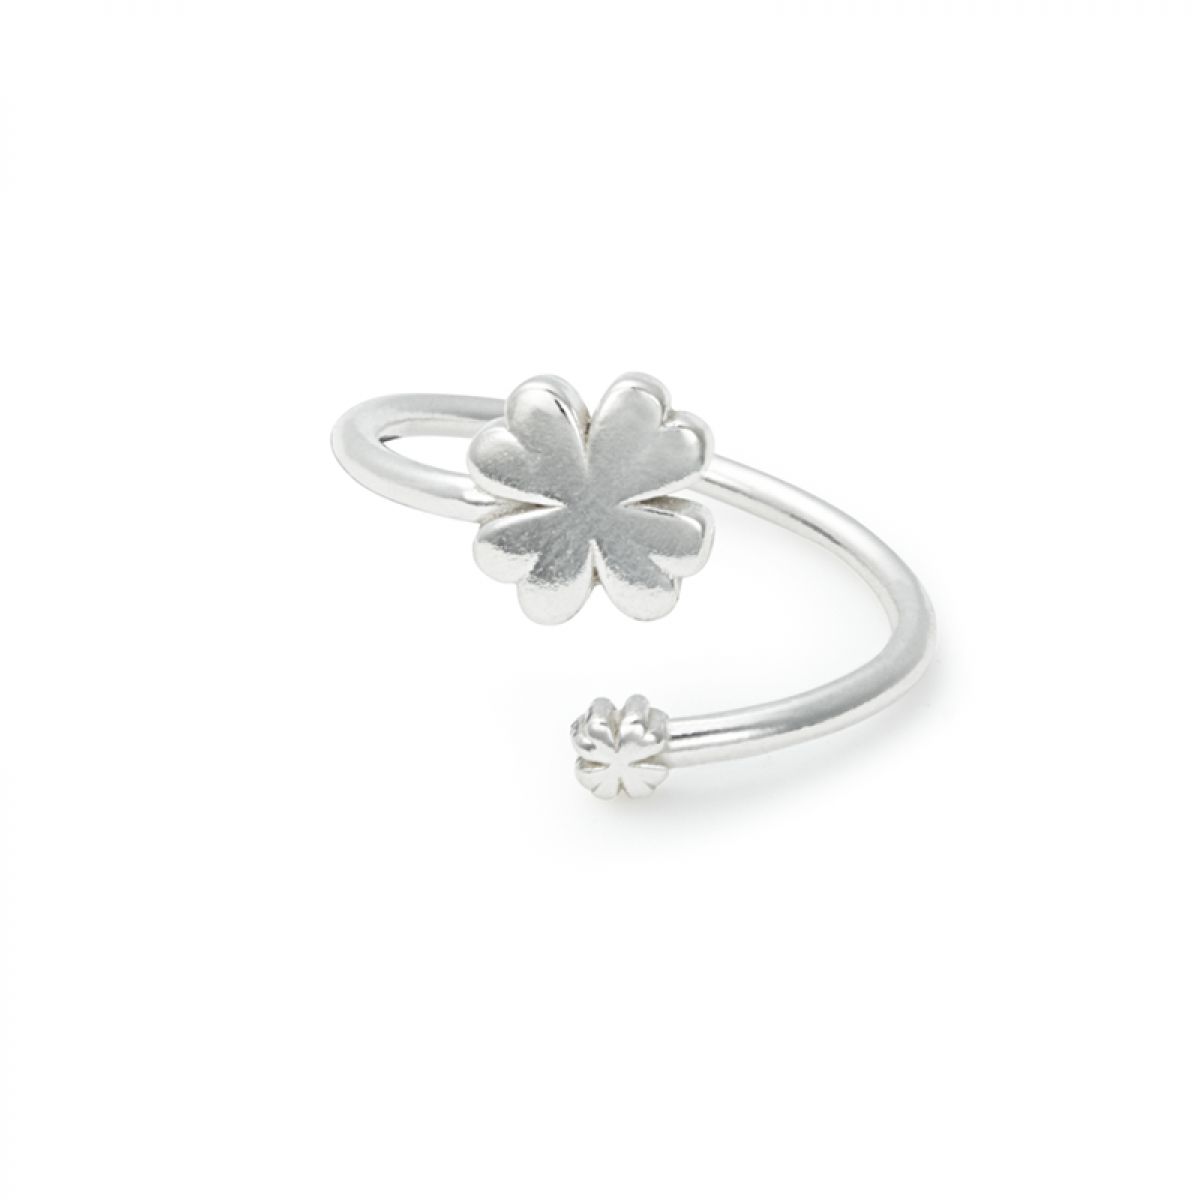 Four Leaf Clover Ring Wrap In Sterling Silver| Alex And Ani Intended For 2018 Dangling Four Leaf Clover Rings (Gallery 4 of 25)